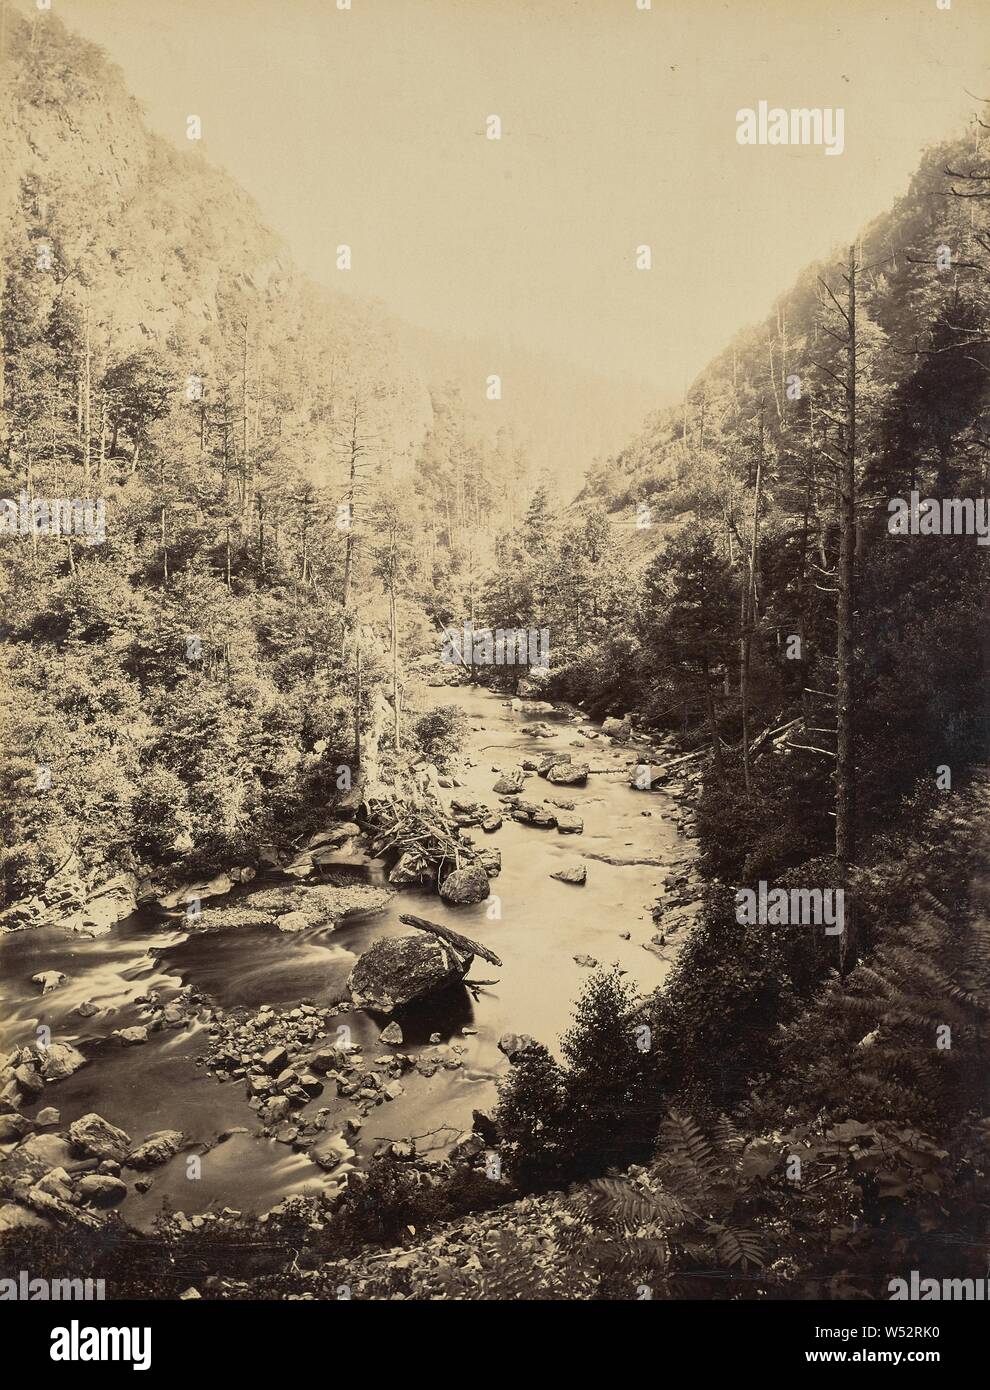 Doe River Gorge, Tennessee, John K. Hillers (American, 1843 - 1925), United States, 1894, Albumen silver print, 32.7 × 24.8 cm (12 7/8 × 9 3/4 in Stock Photo